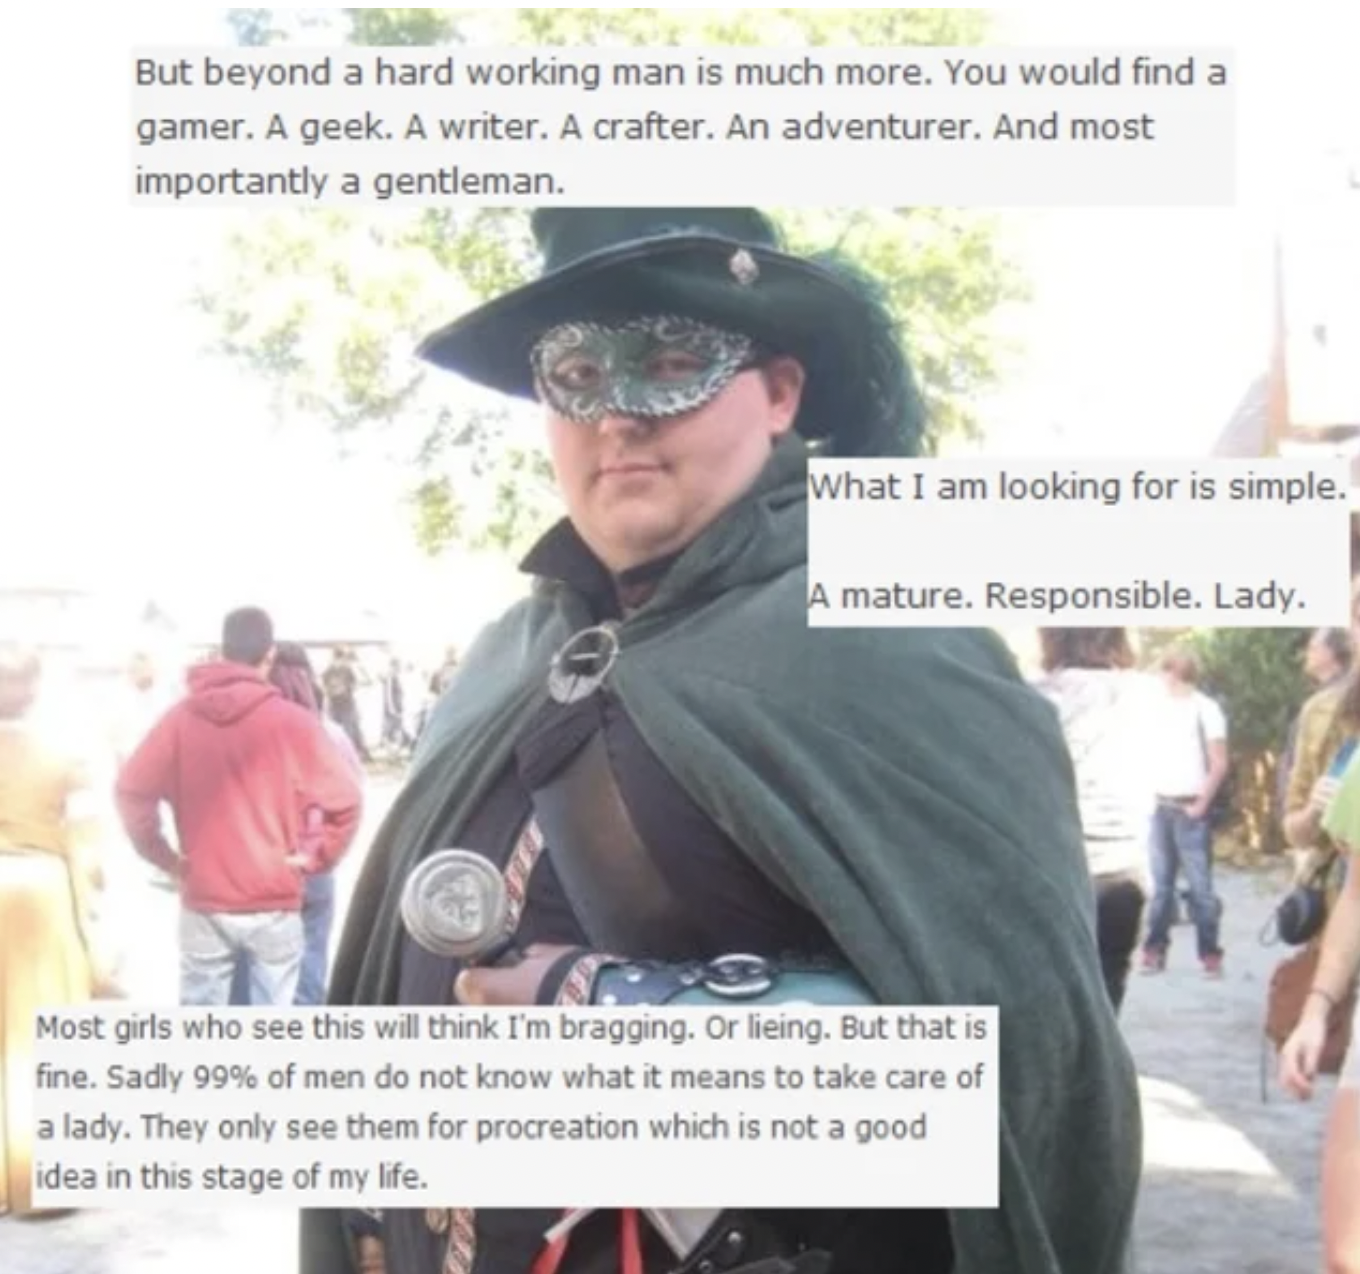 Cringey Pics - nice guys of okcupid - But beyond a hard working man is much more. You would find a gamer. A geek. A writer. A crafter. An adventurer. And most importantly a gentleman. What I am looking for is simple. A mature. Responsible. Lady. Most girl